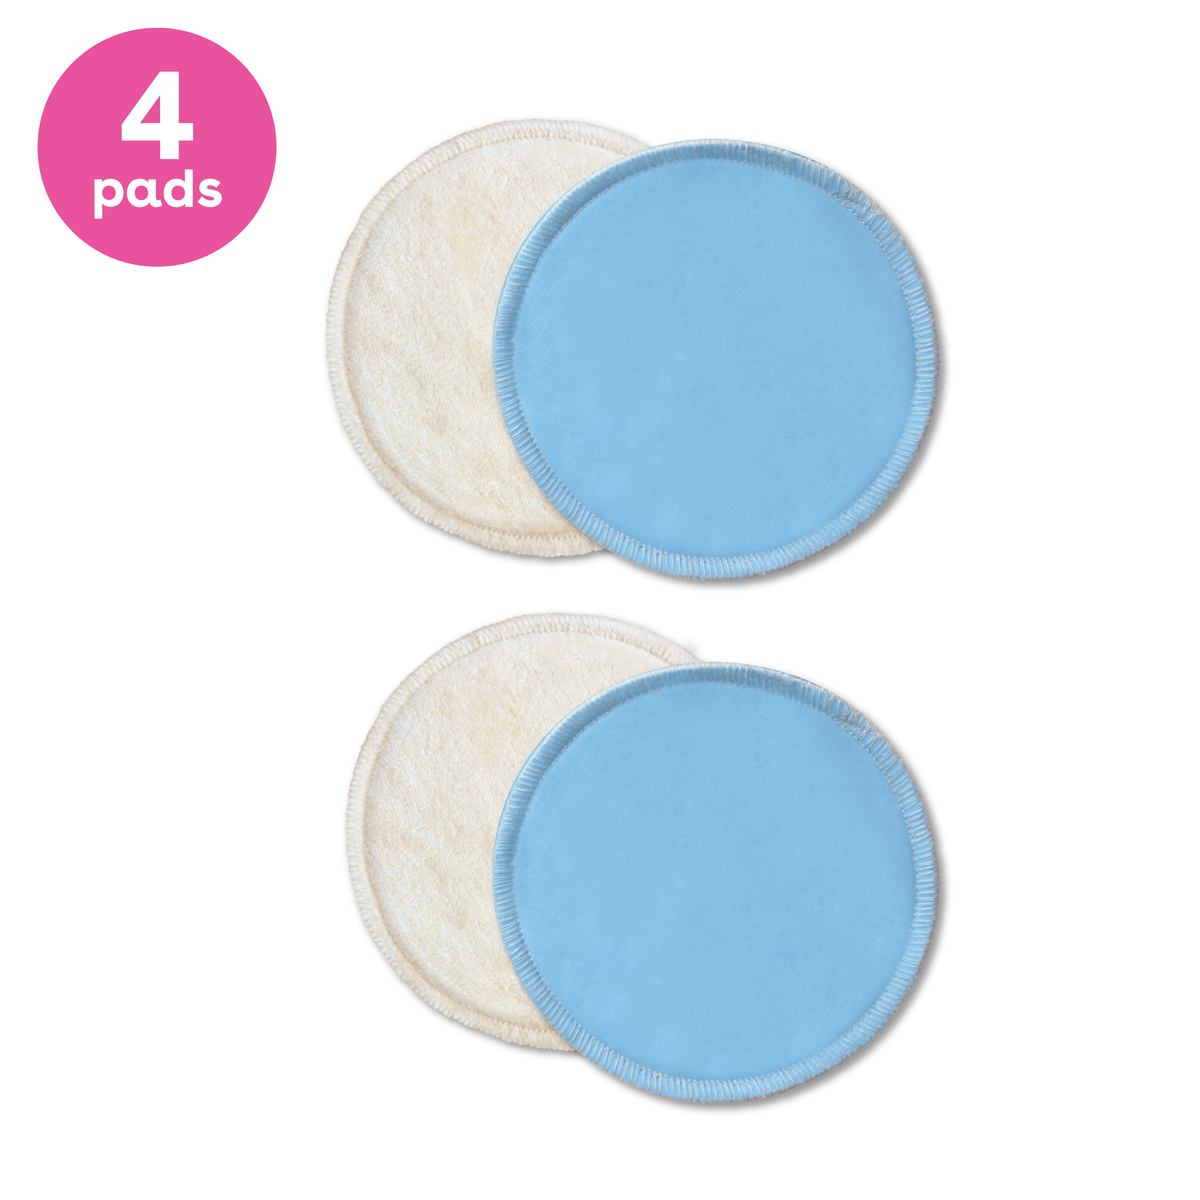 Nursing Pads - 8 Washable Pads - Reusable Breastfeeding Cotton Pads for  Overnight Leak Protection